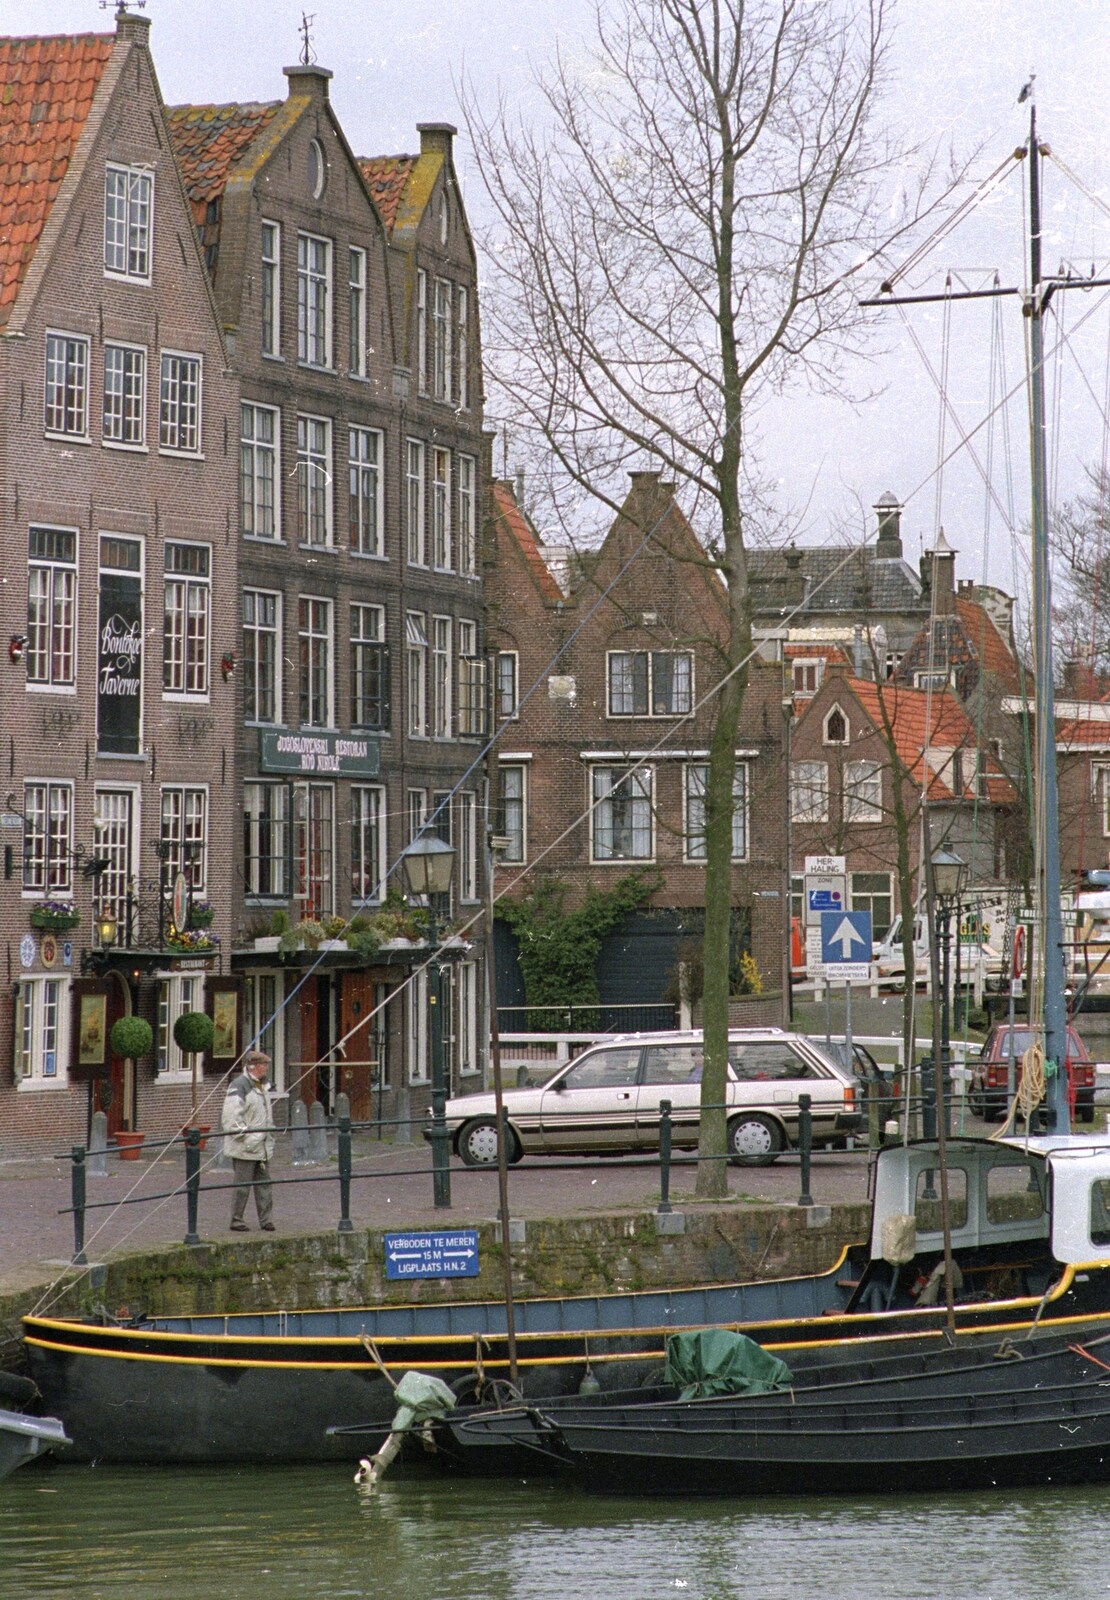 Out and About in Amsterdam, Hoorne, Vollendam and Edam, The Netherlands - 26th March 1992: At the river